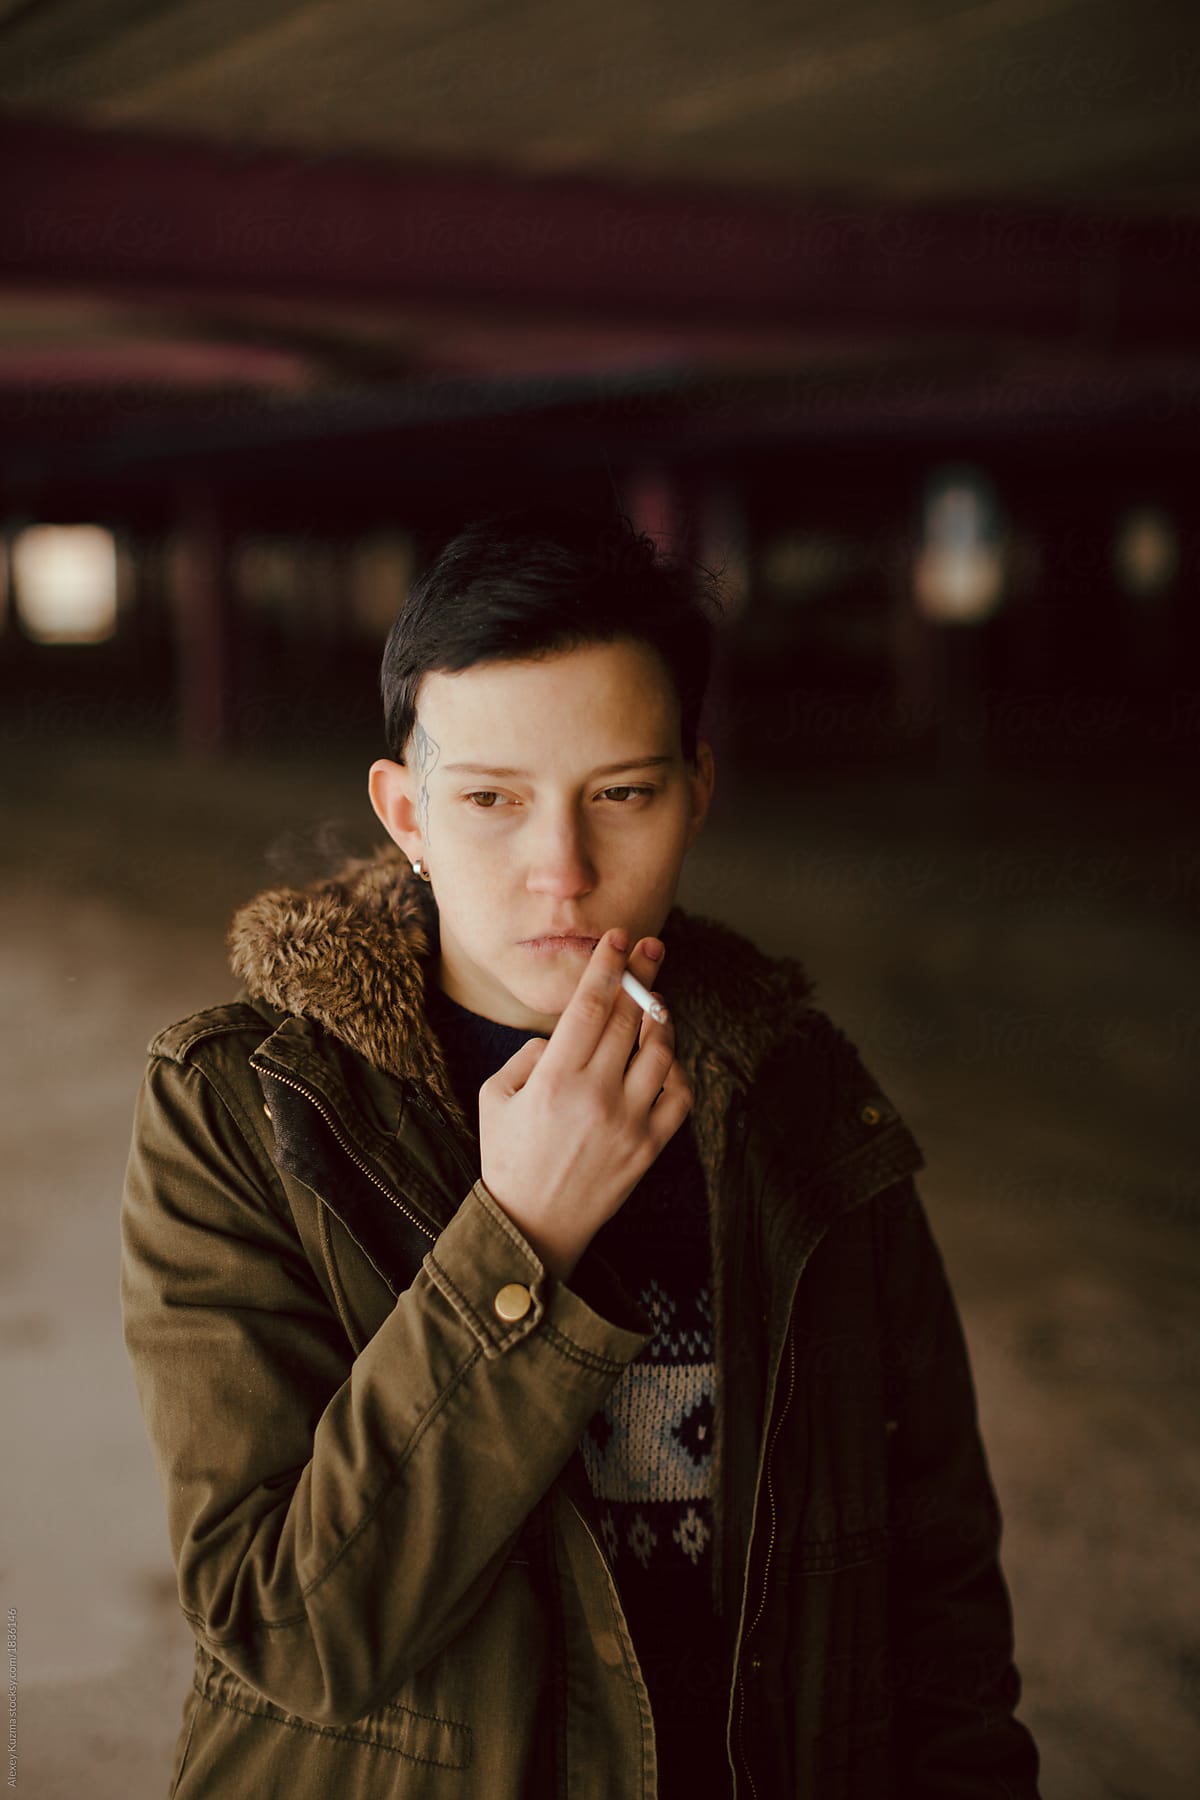 Real Lesbian Girl Smoking On The Parking Area By Stocksy Contributor